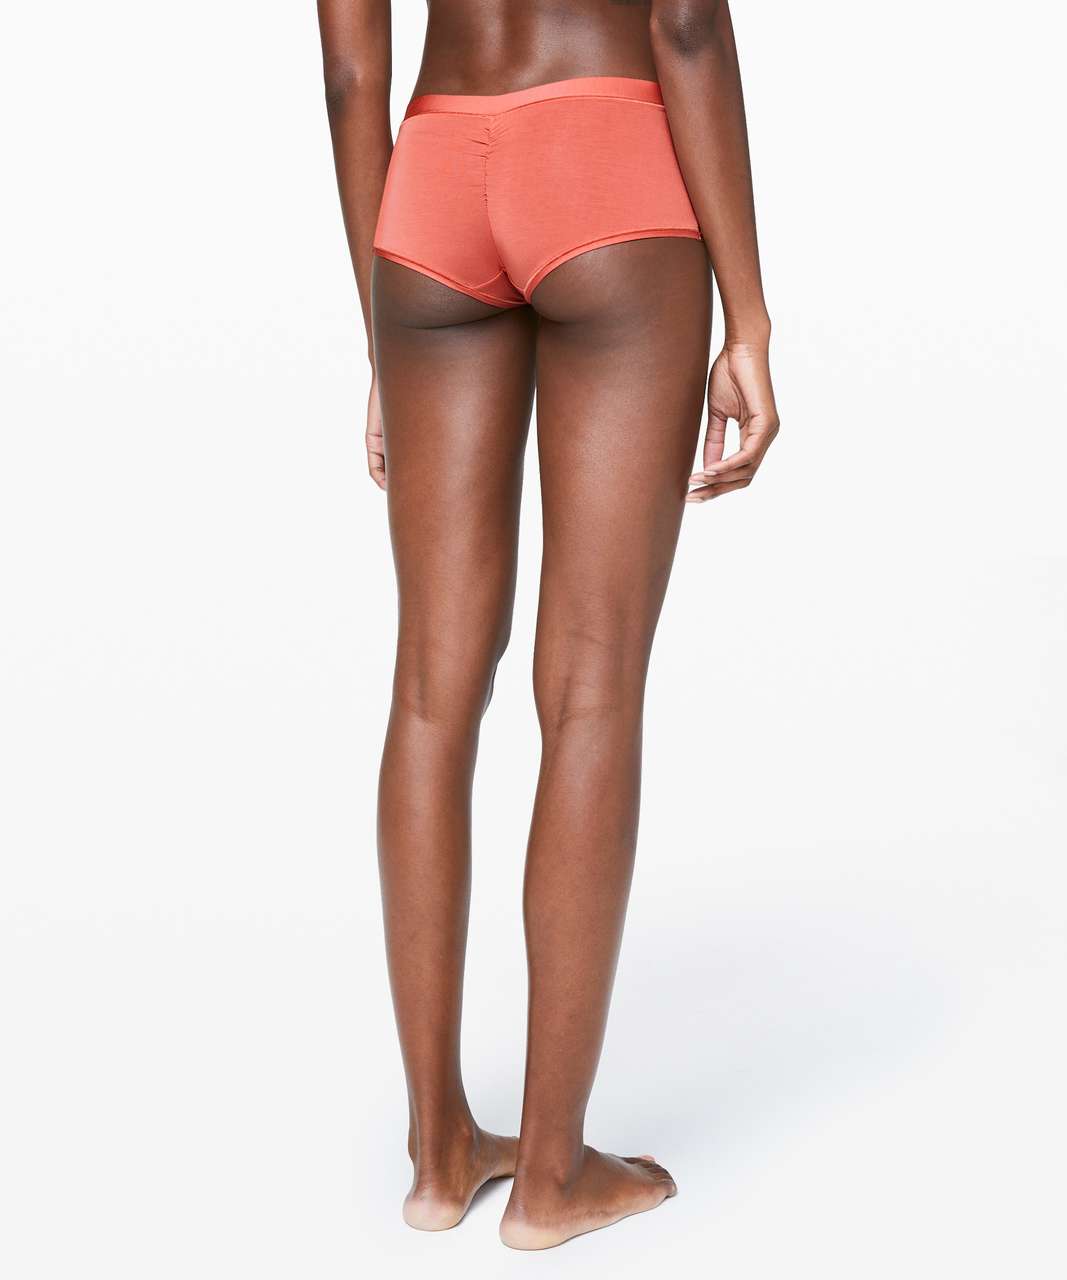 Lululemon Simply There Boyshort - Rustic Coral